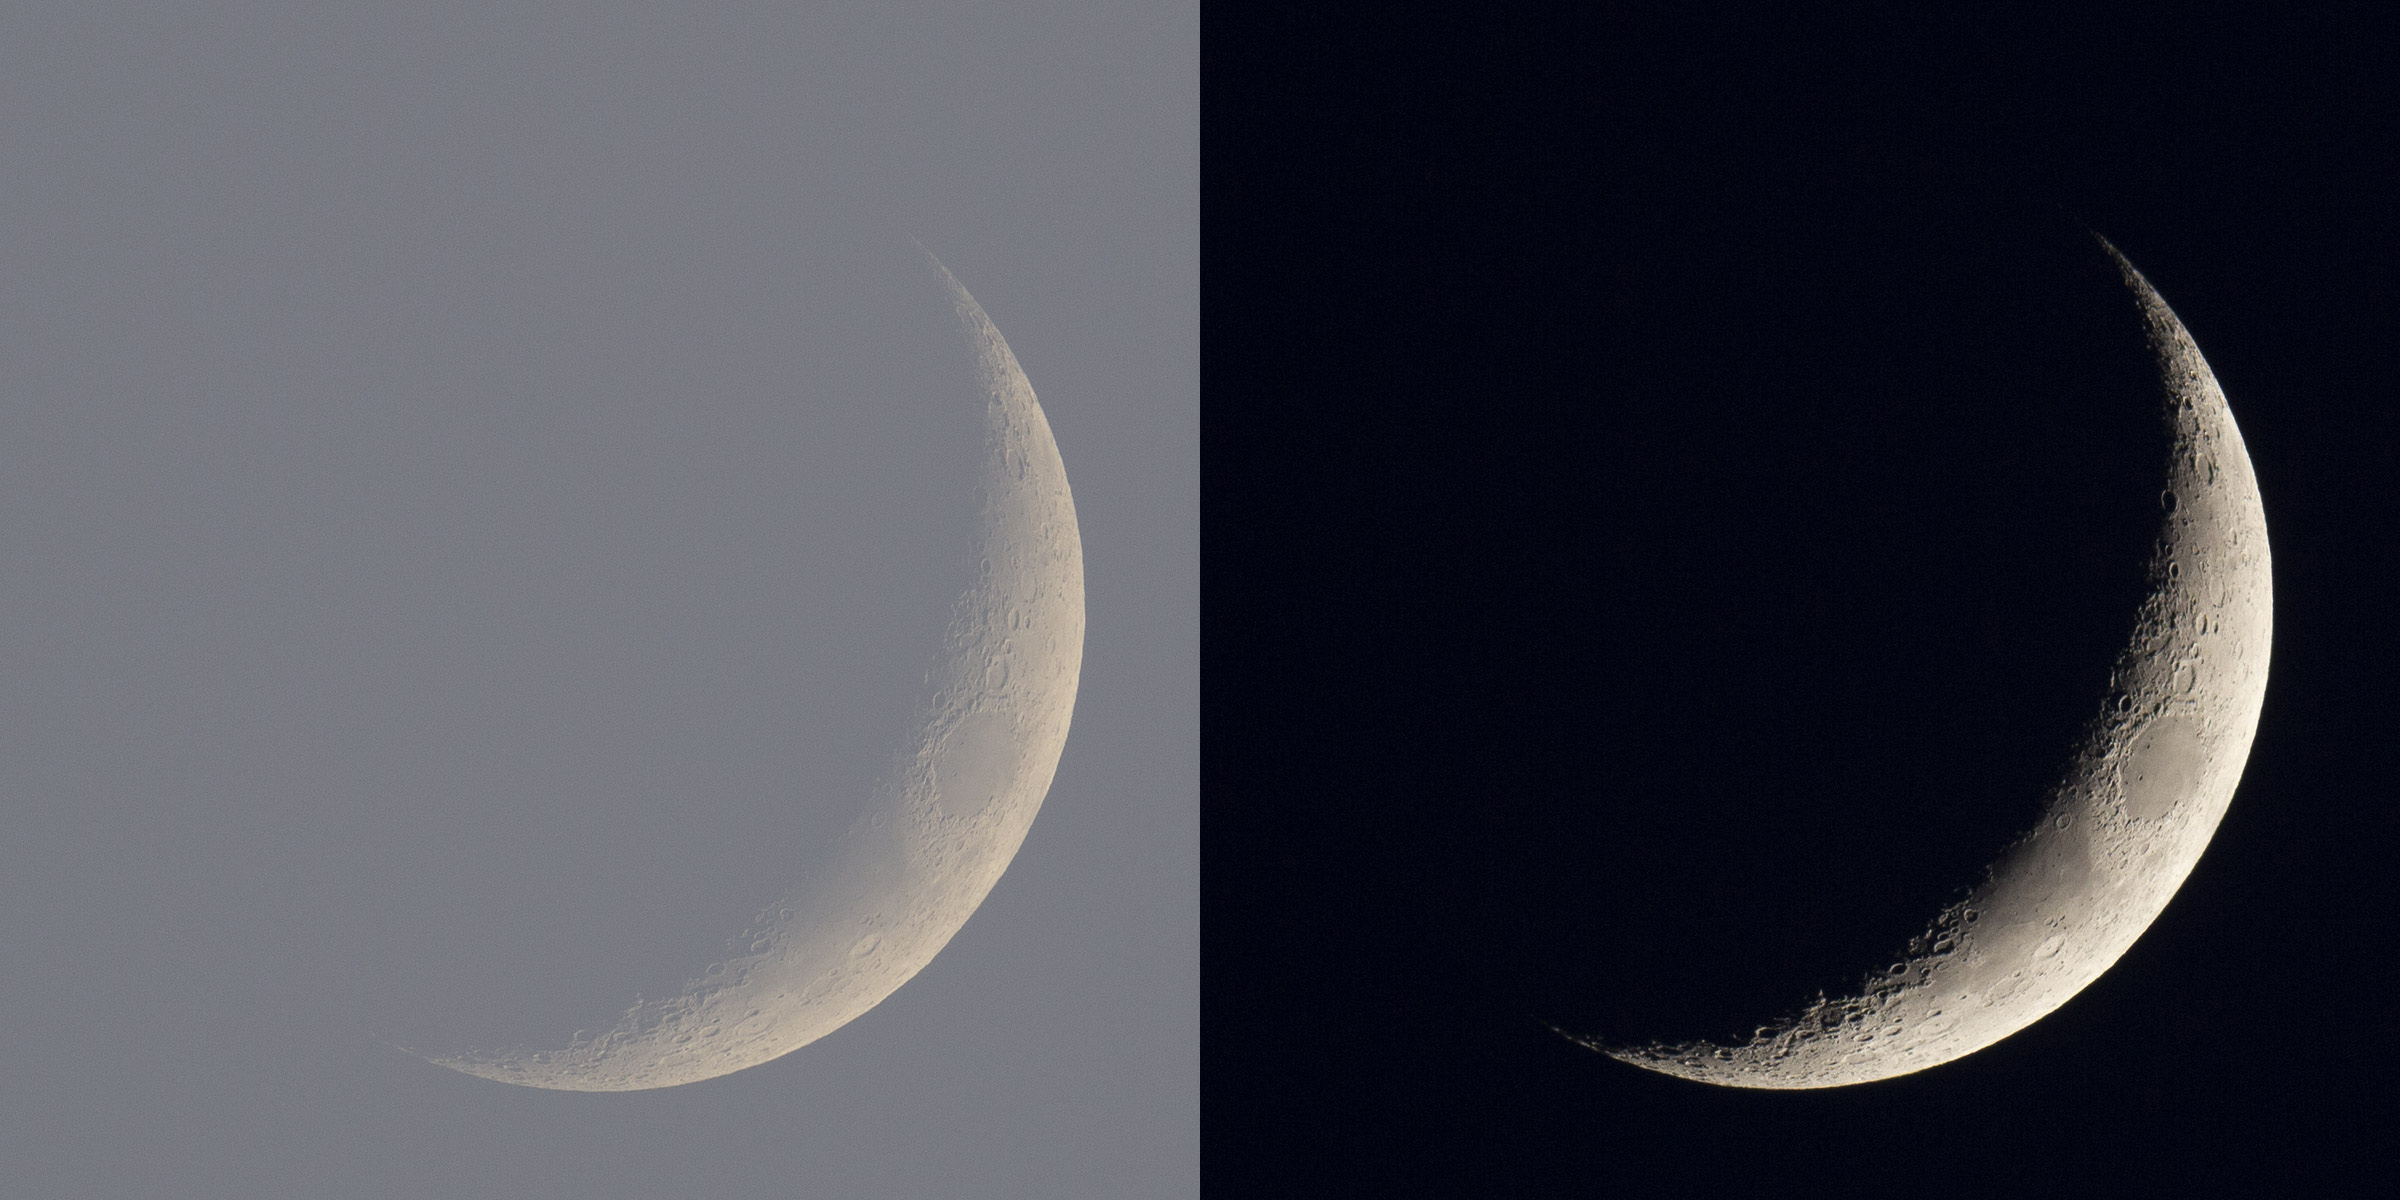 Two detailed telescope images of the crescent moon showing details like craters, one faint in a gray sky (left) and one a little more distinct in a black sky (right).